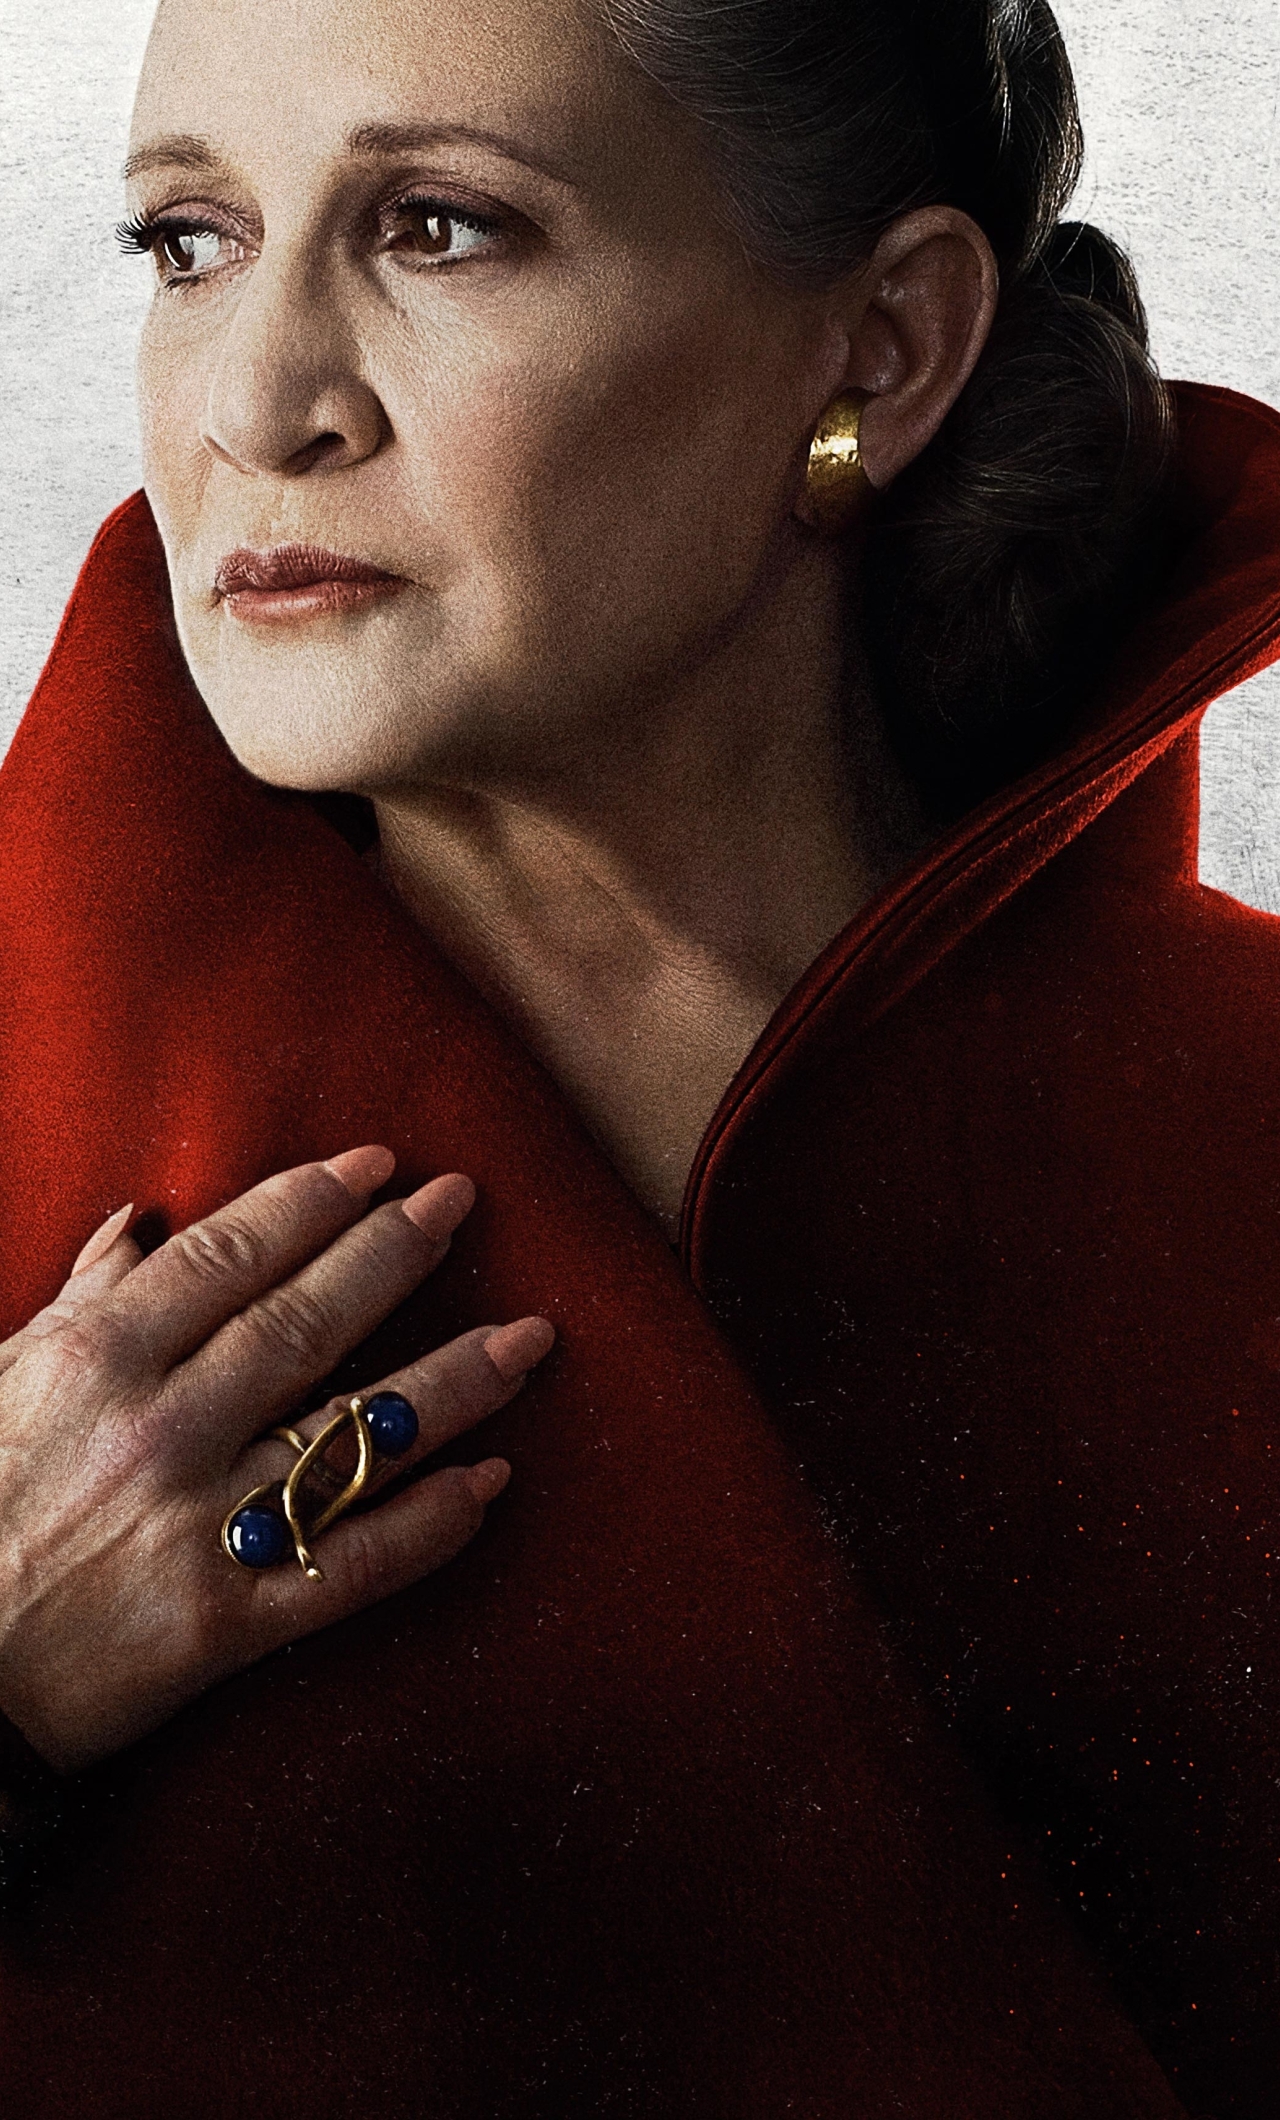 1280x2120 Princess Leia Star Wars The Last Jedi Iphone 6 Plus Wallpaper Hd Movies 4k Wallpapers Images Photos And Background